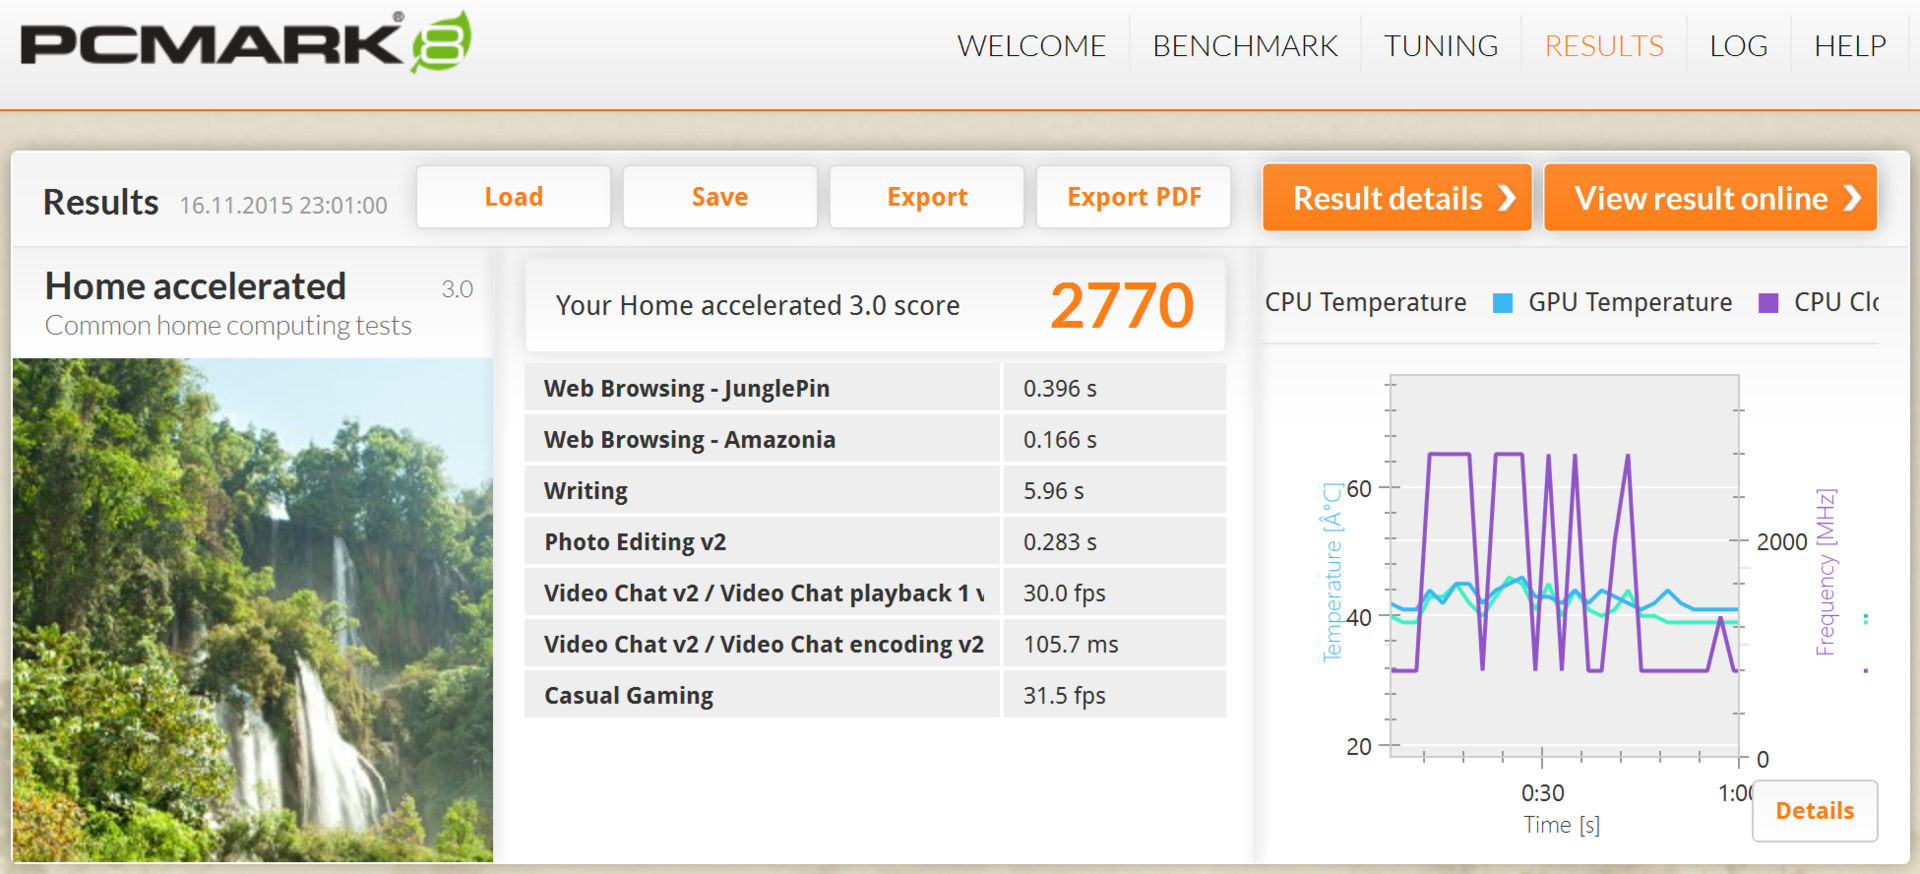 PCMARK. PCMARK 8. PCMARK 10. Futuremark PCMARK 10 professional Edition. Detailed results